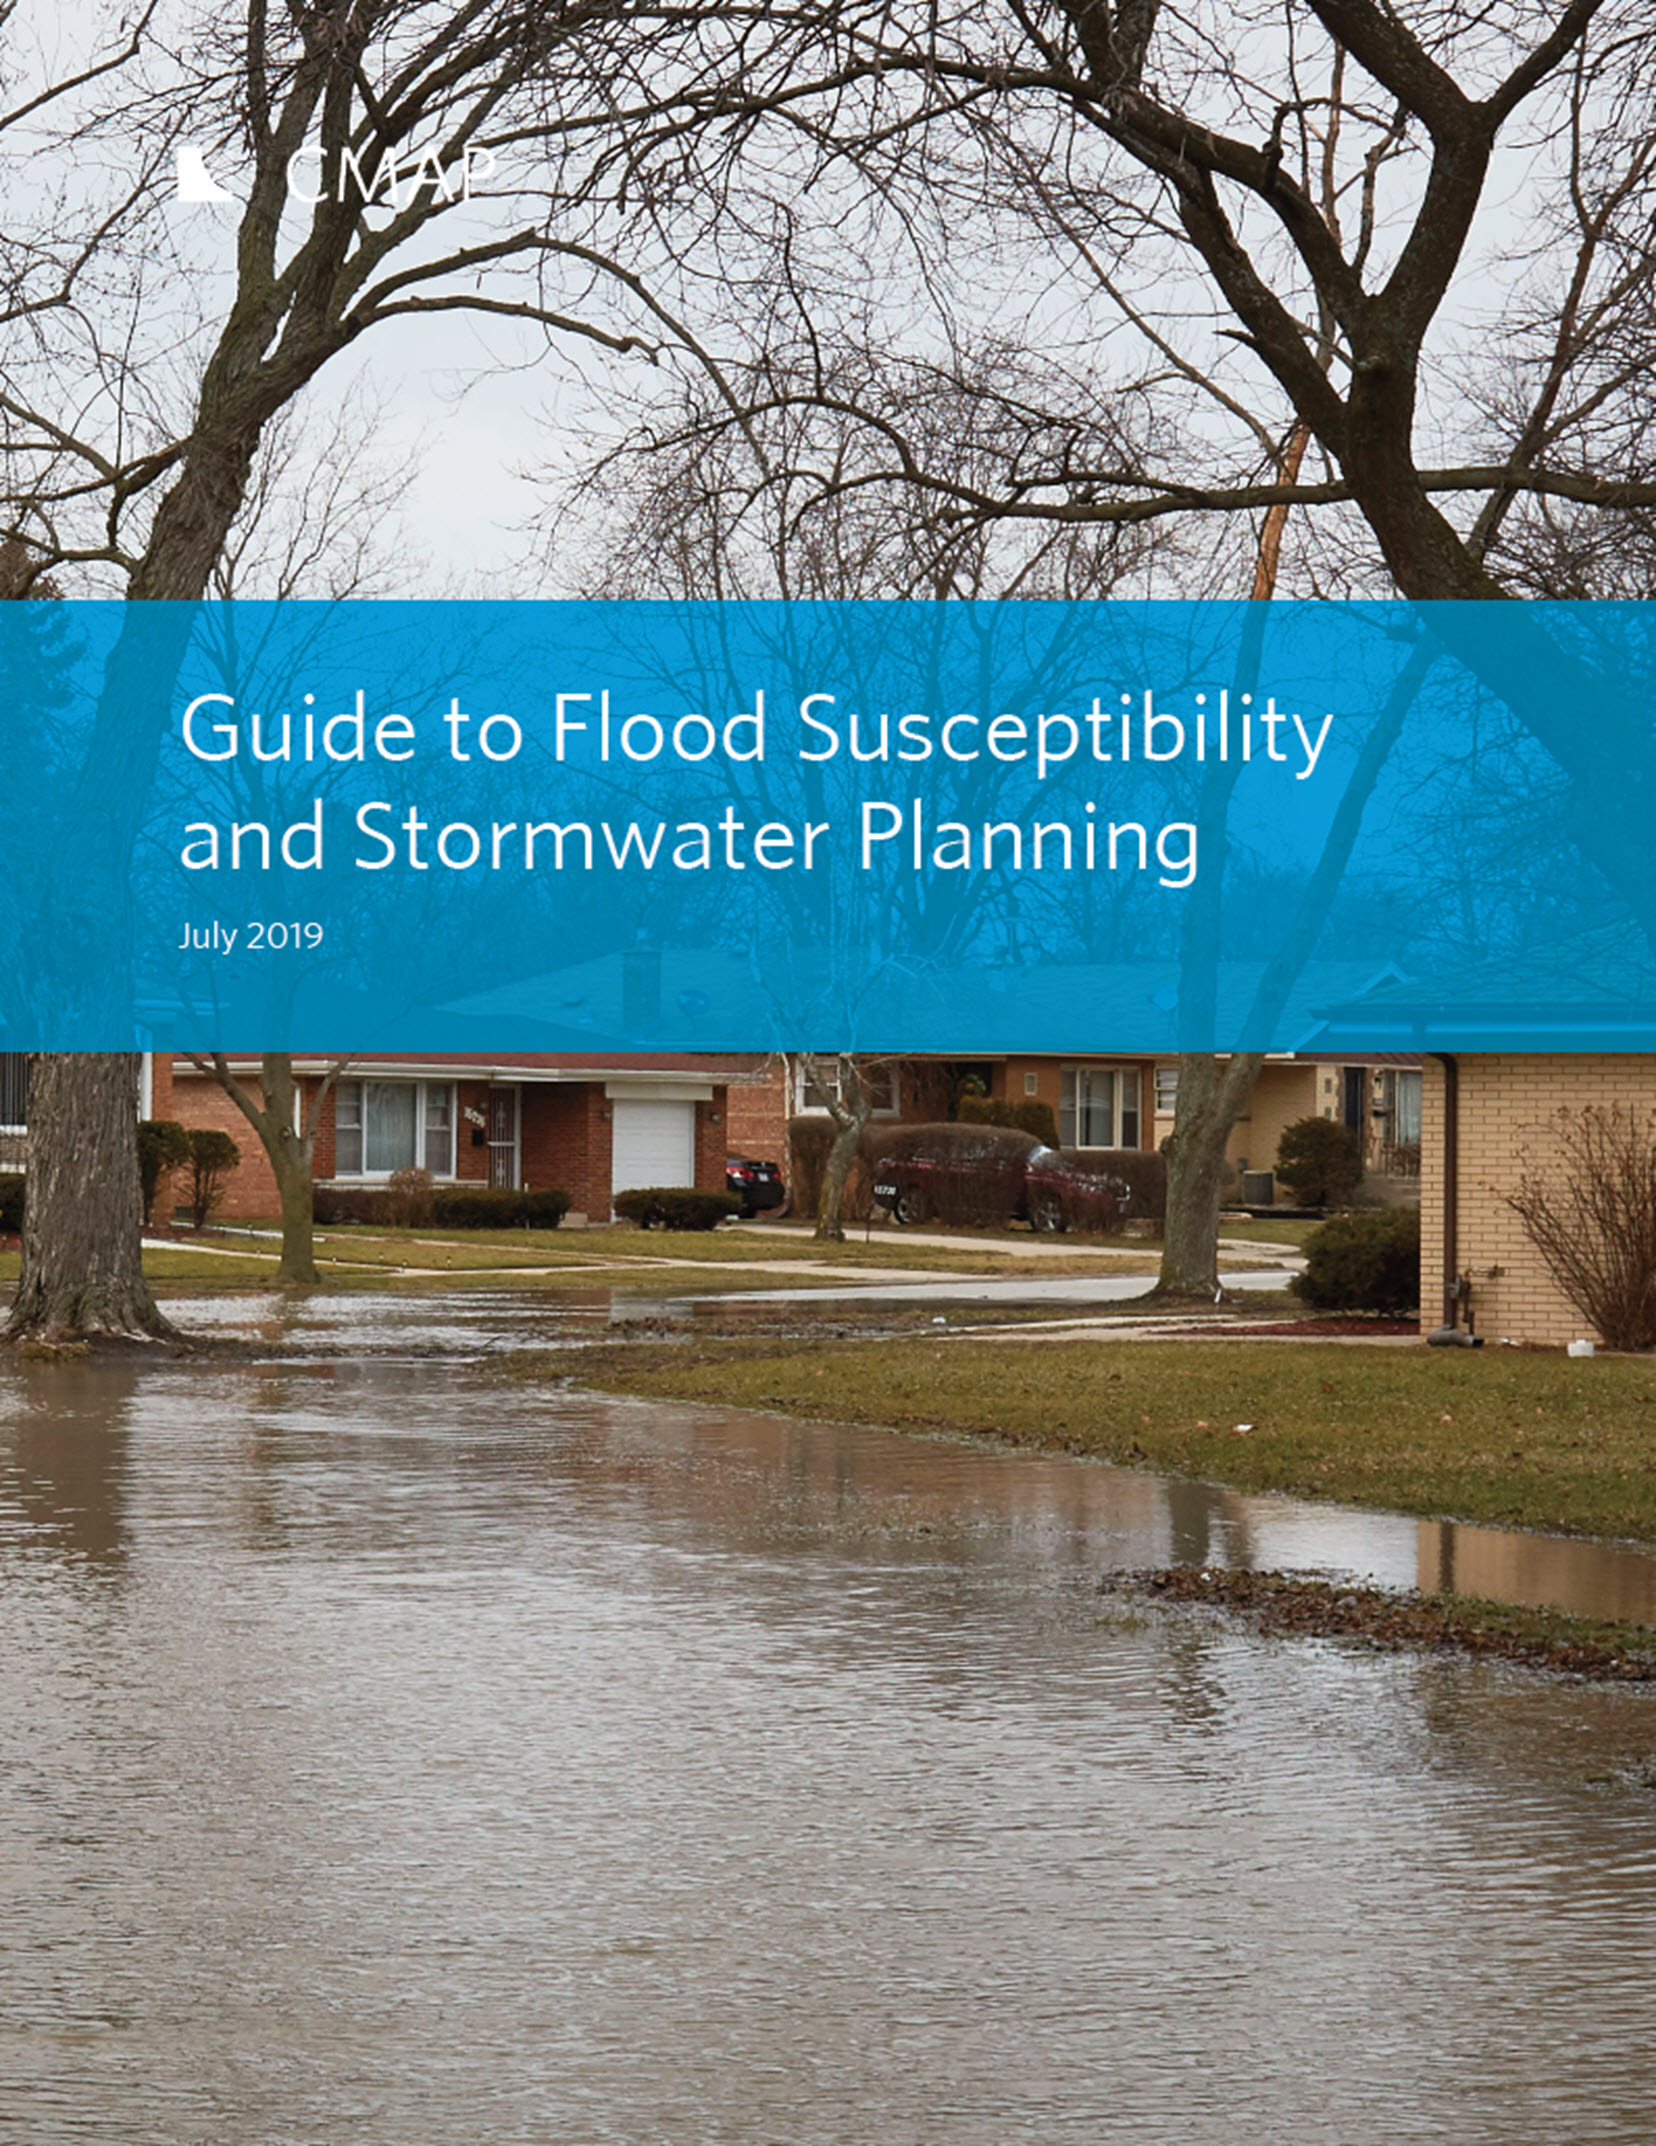 Cover page with image of flooded streets in a residential neighborhood